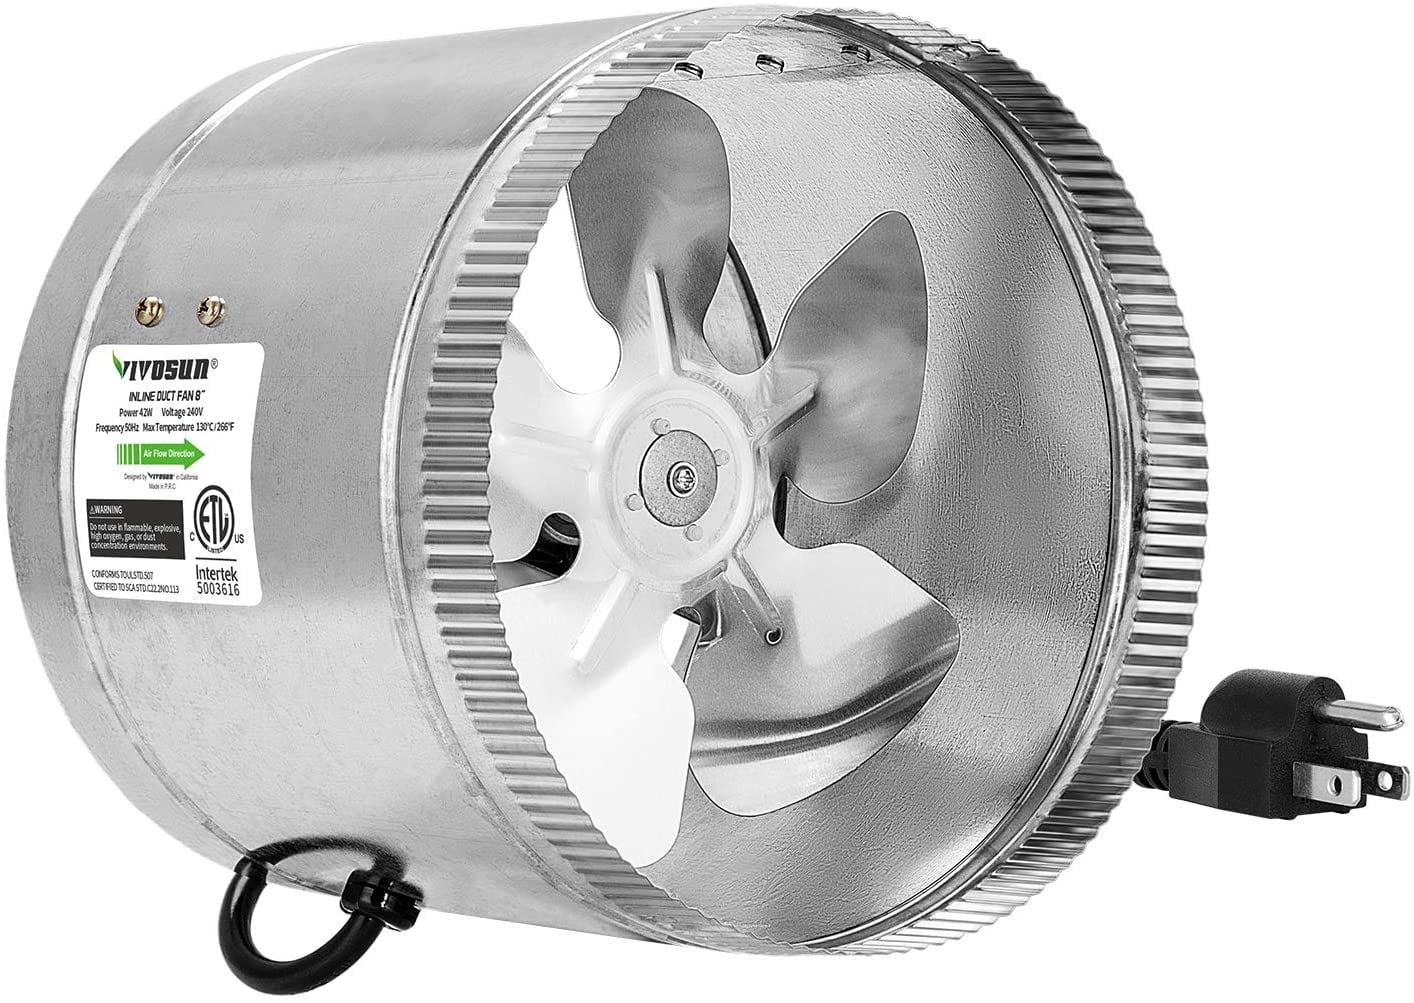 Exhaust Blower Booster Vent Air Ventilation Inline Duct Fan 8 Inch 420 CFM 